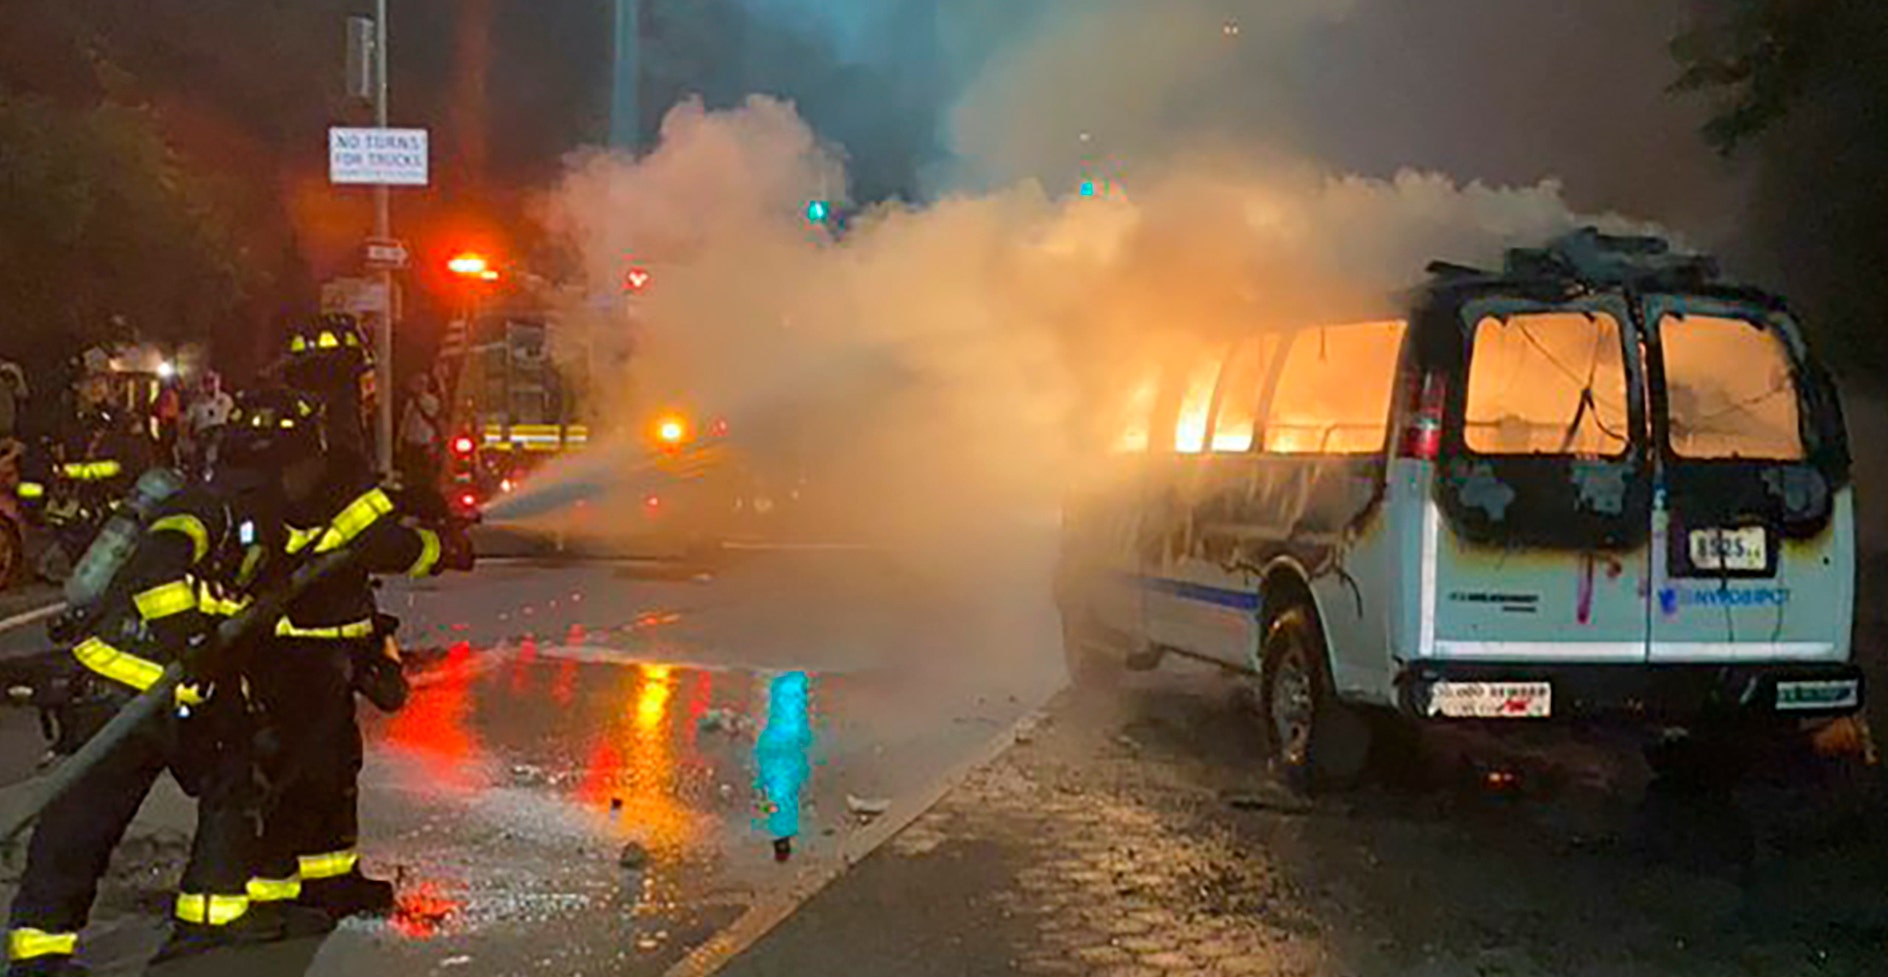 NY woman faces attempted murder charges for throwing molotov cocktail at NYPD van during riots: reports